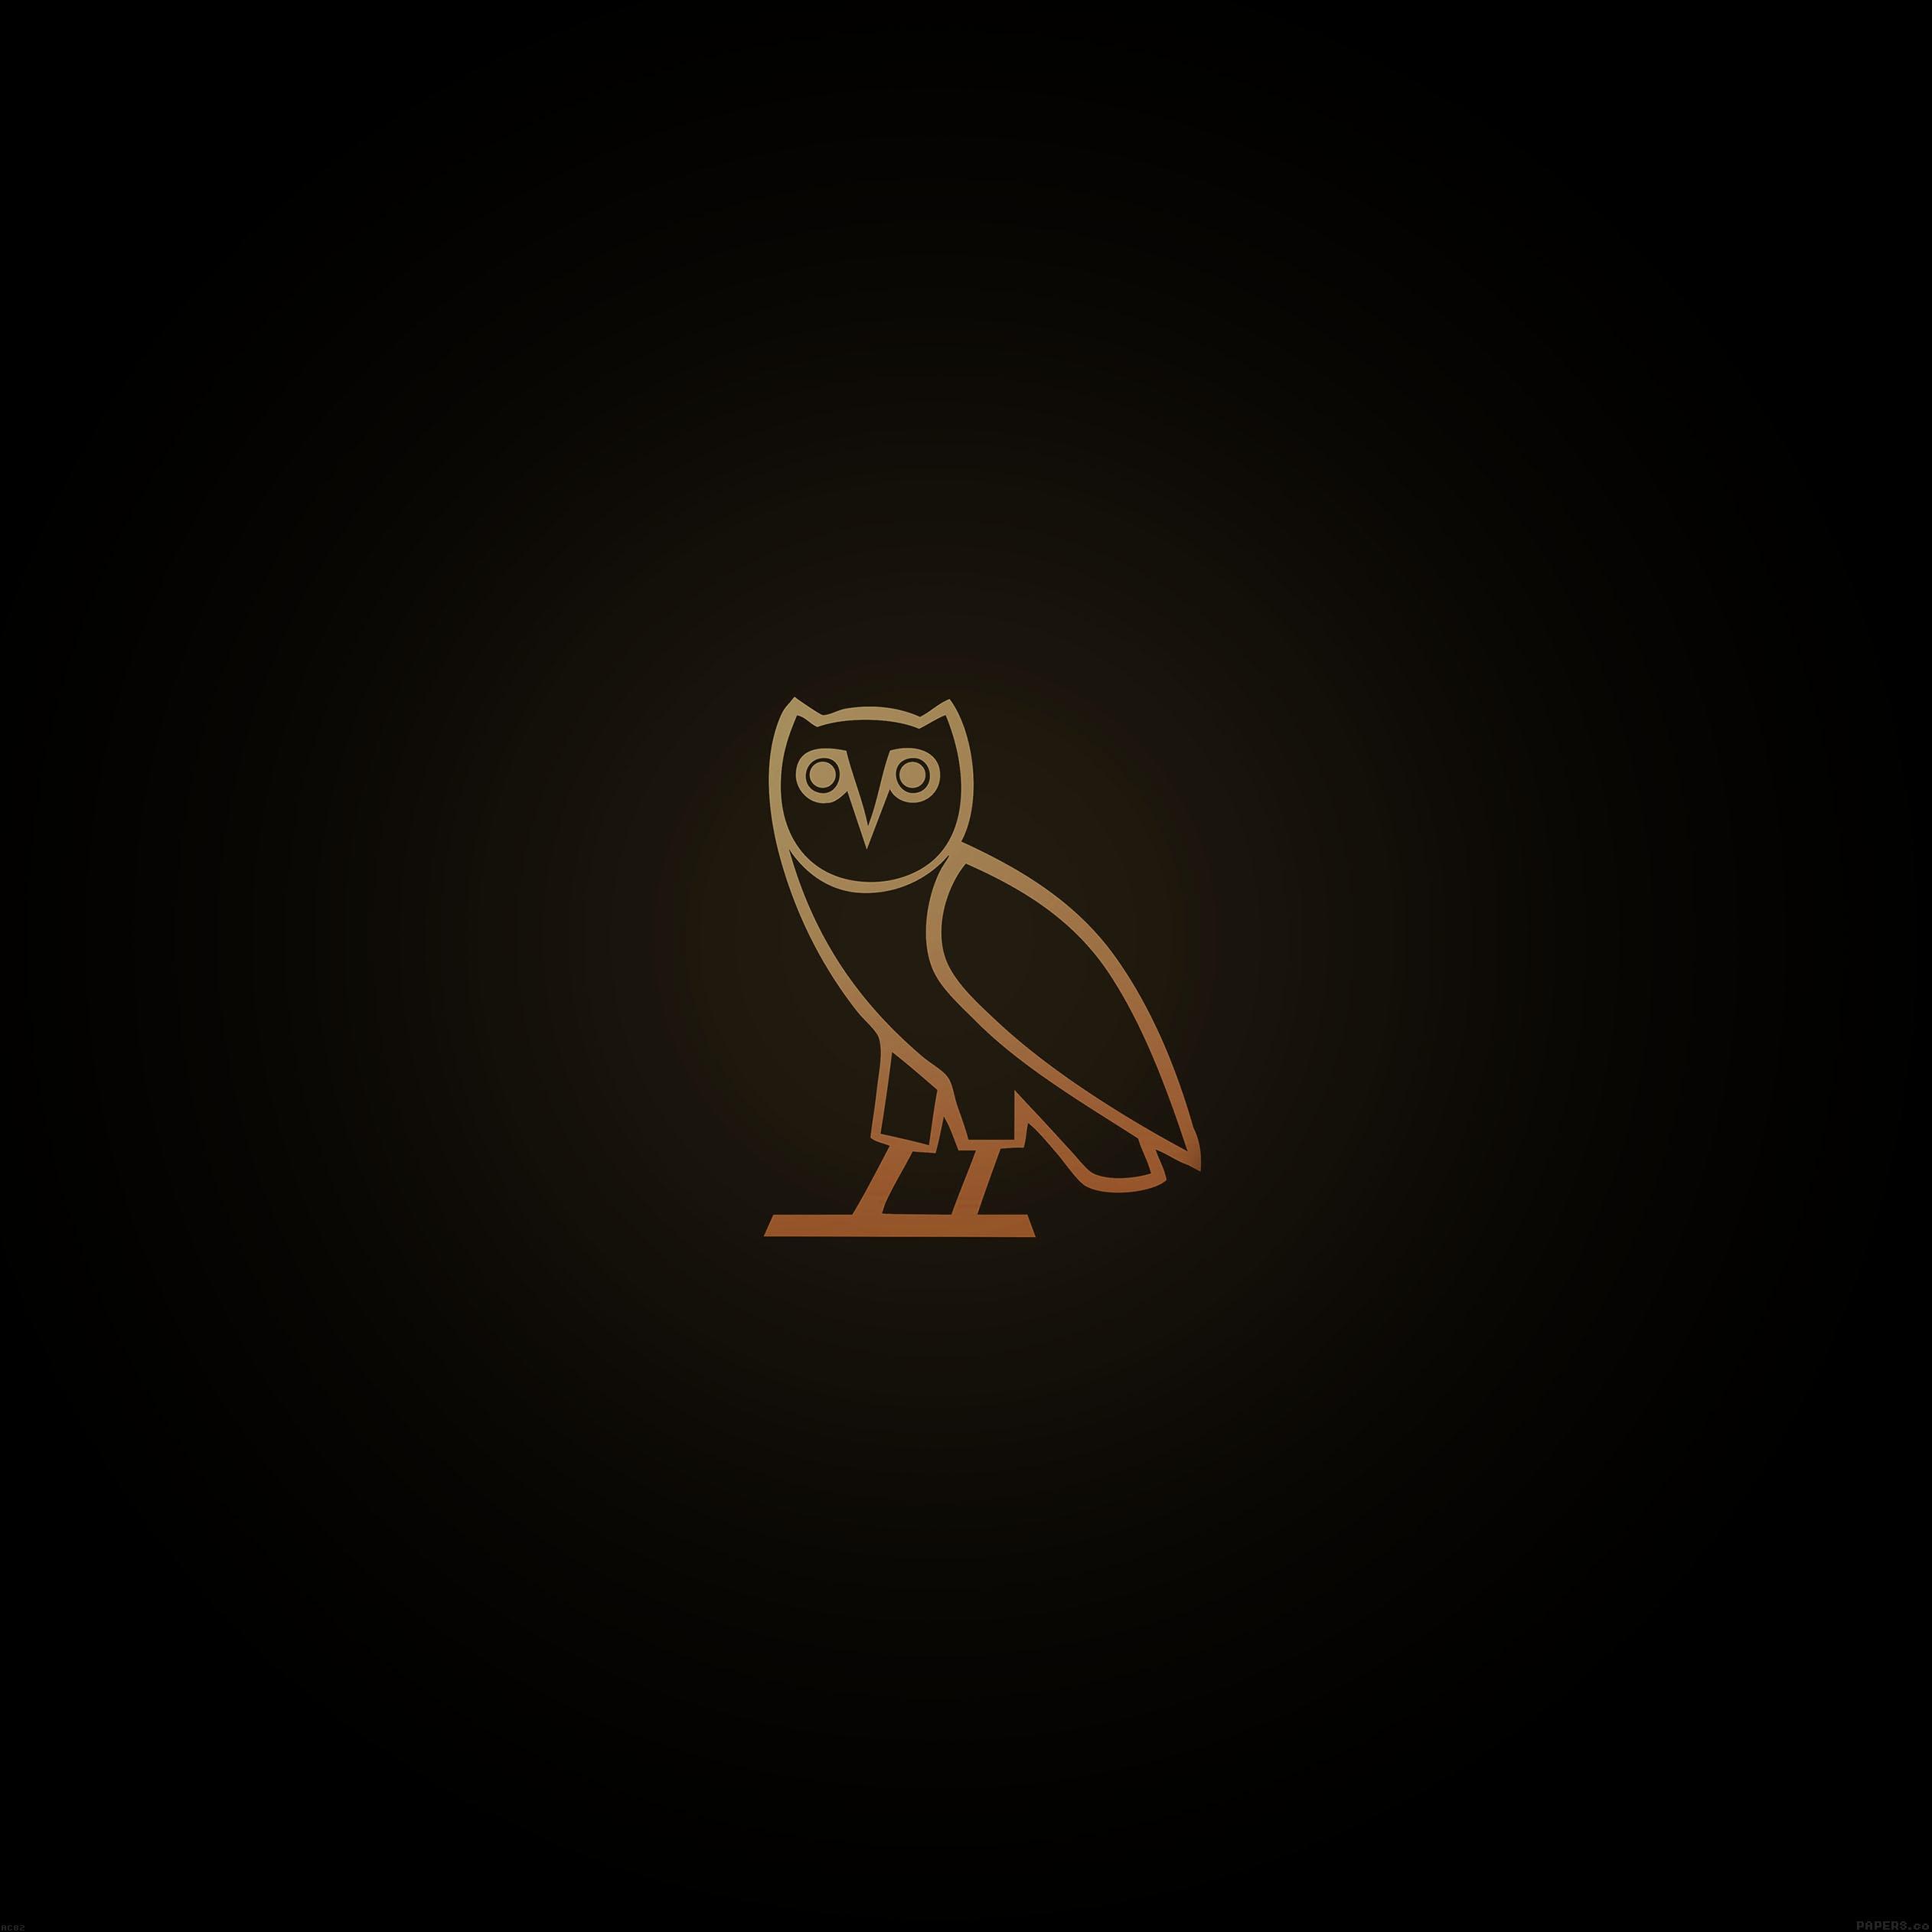 Awesome Ovo Wallpaper 2019